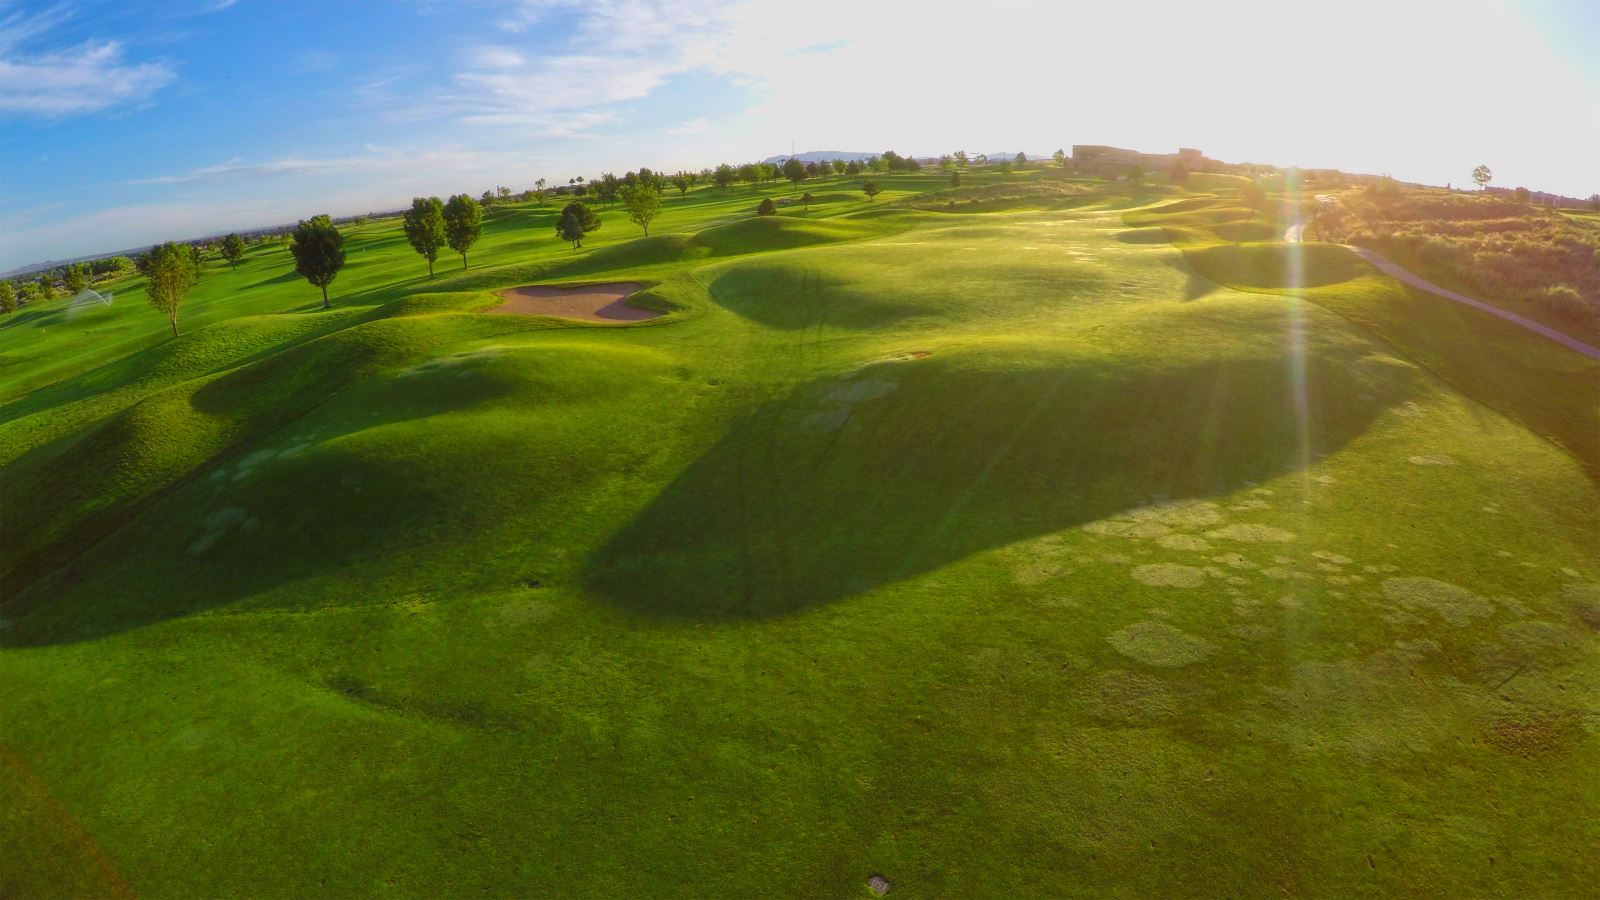 Lessons From The Isleta Golf Pro – “Golf Is Not Perfect”